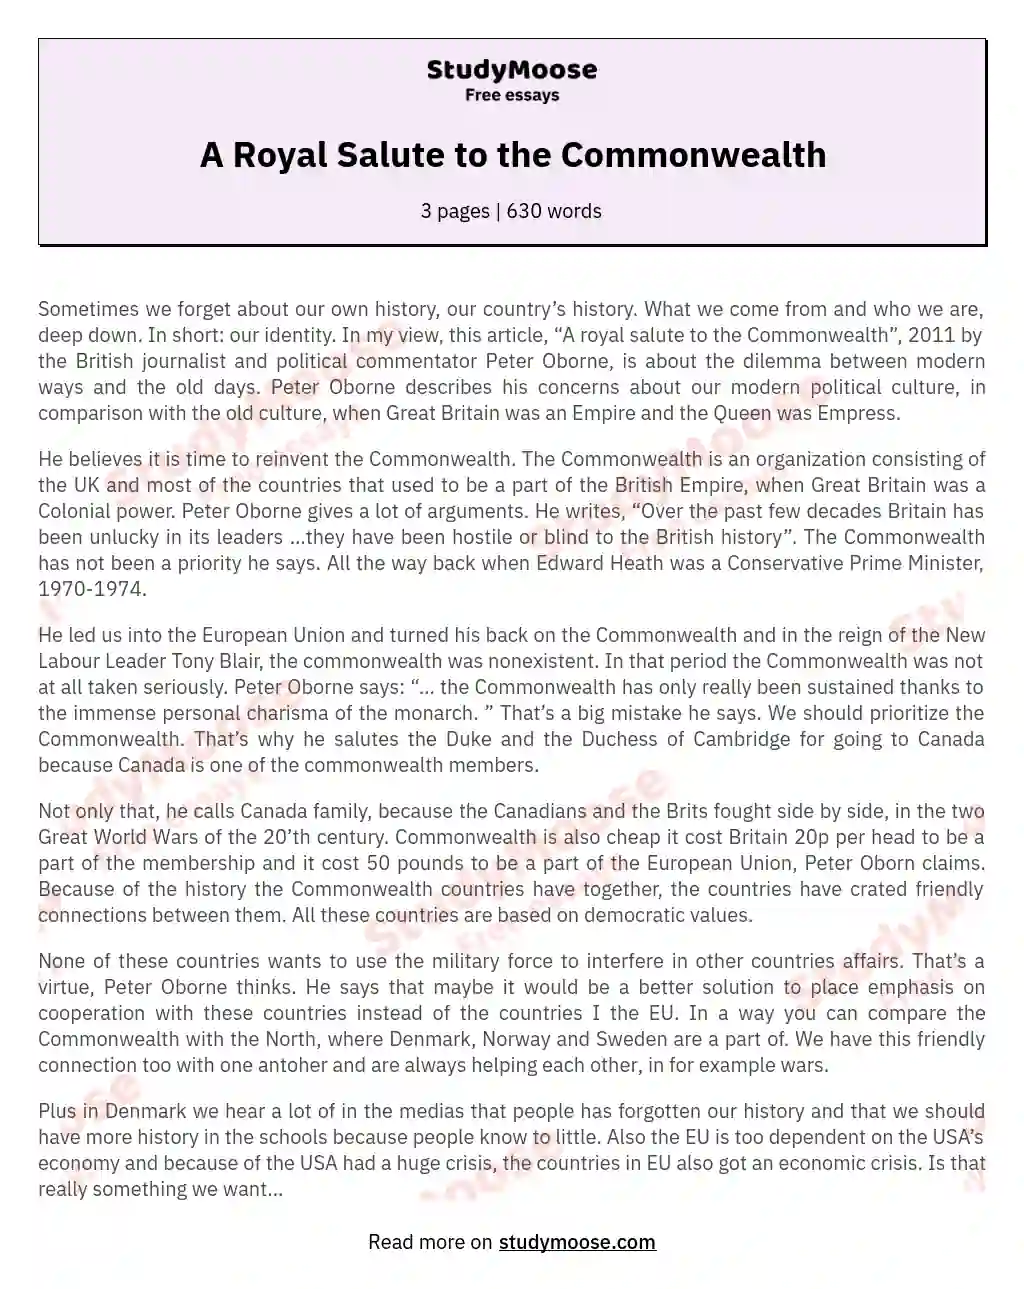 what is the word limit for commonwealth essay